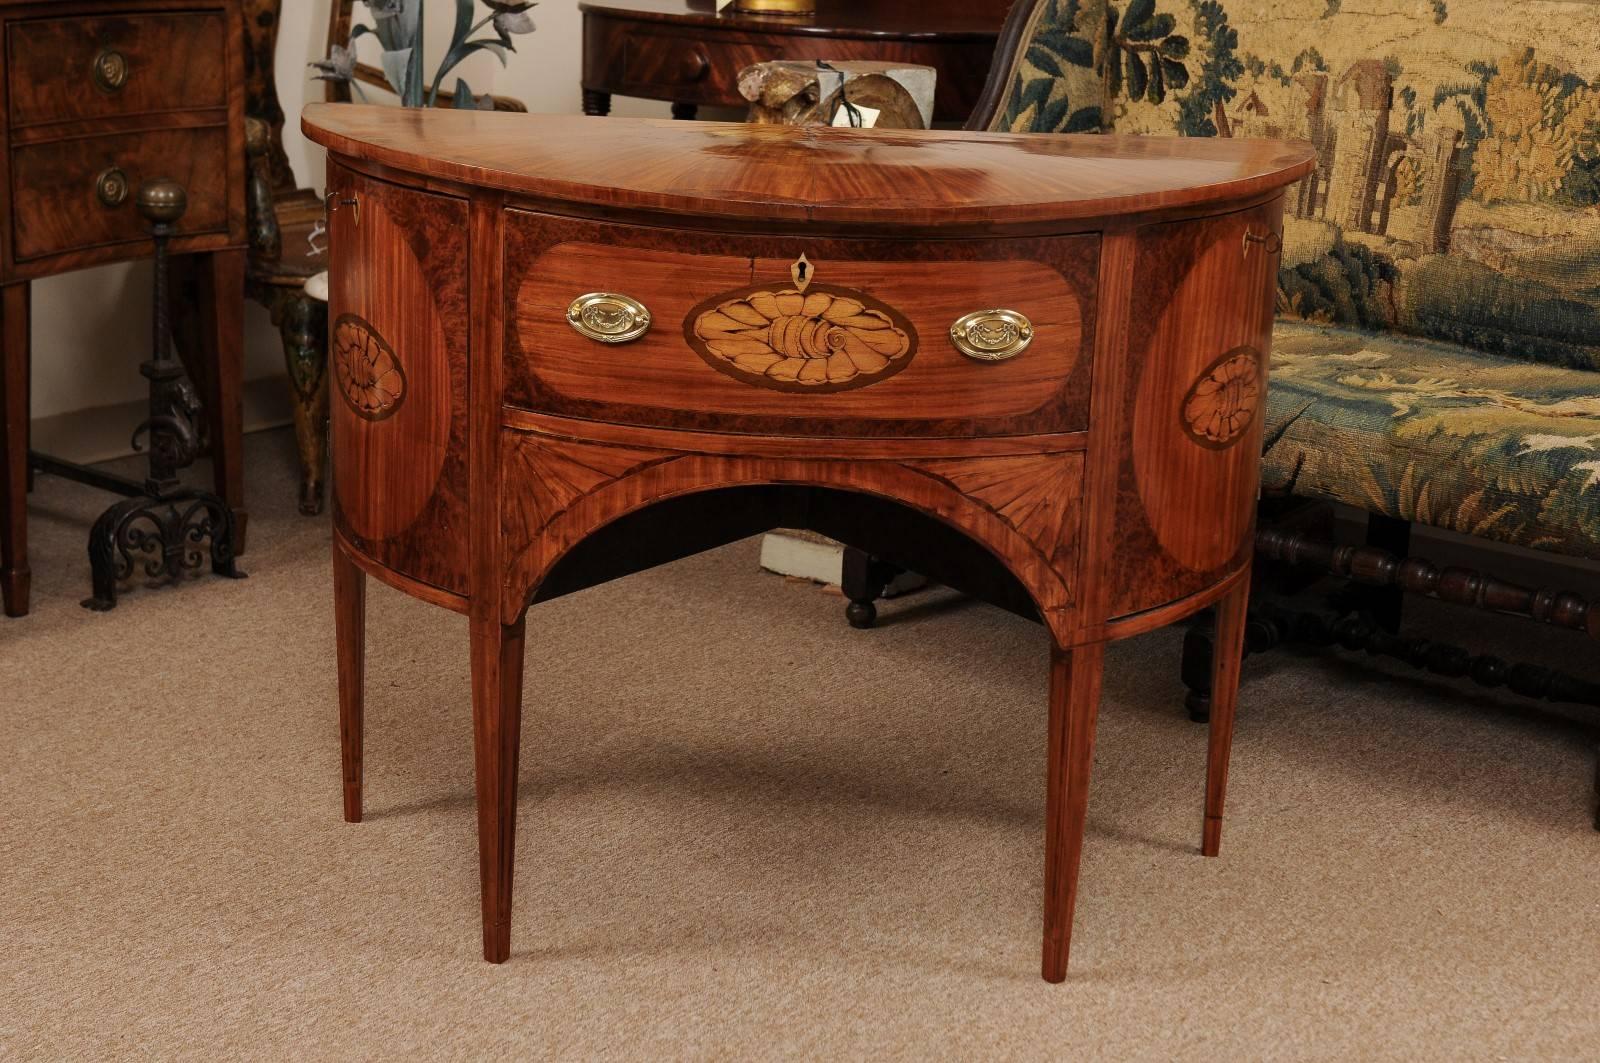 Satinwood D-Shaped Brand Board / Petite Sideboard with Beautiful Shell Inlay on the facade of Center Drawer flanked by Two (2) Cabinet Doors & Tapered Legs, England circa 1820